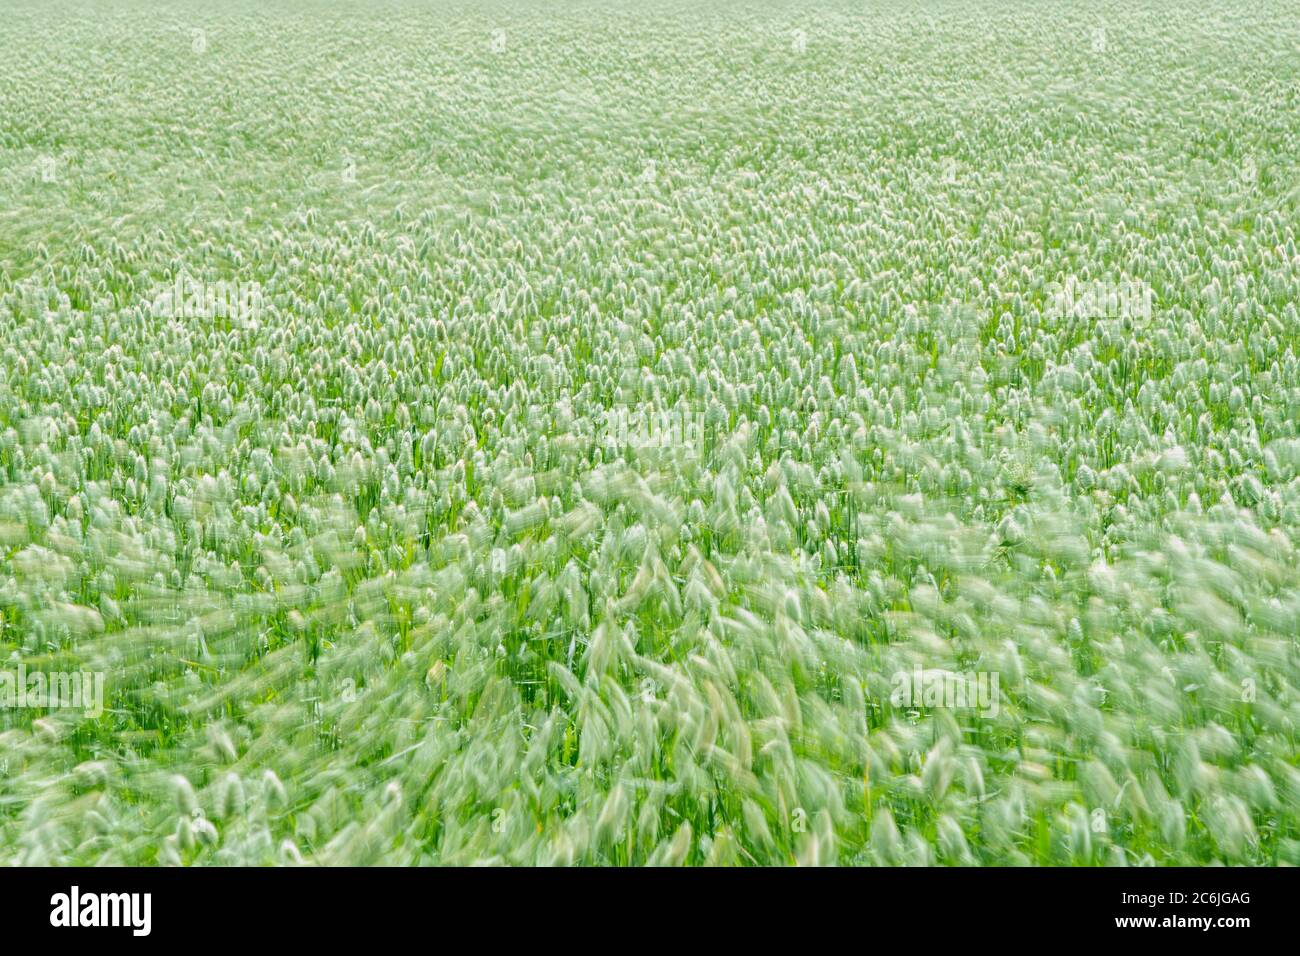 Canary grass (Phalaris canariensis) moving in the wind Stock Photo